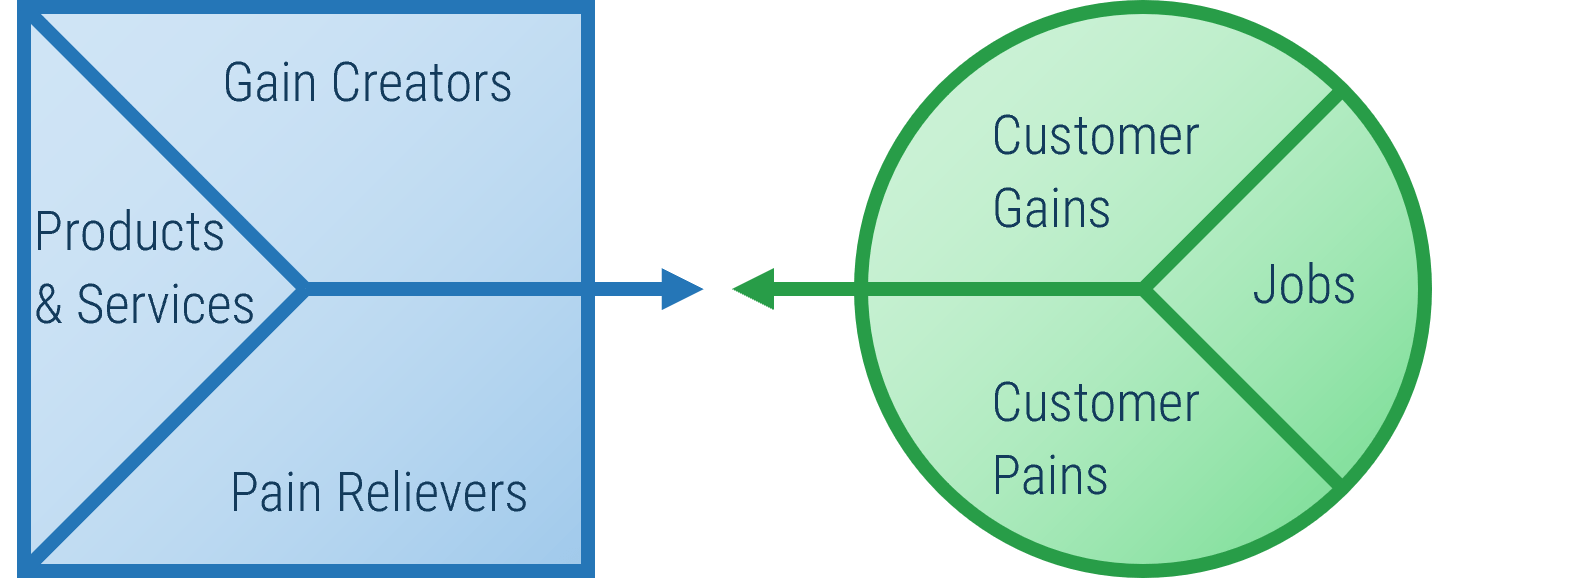 an image of the Value Proposition Canvas 